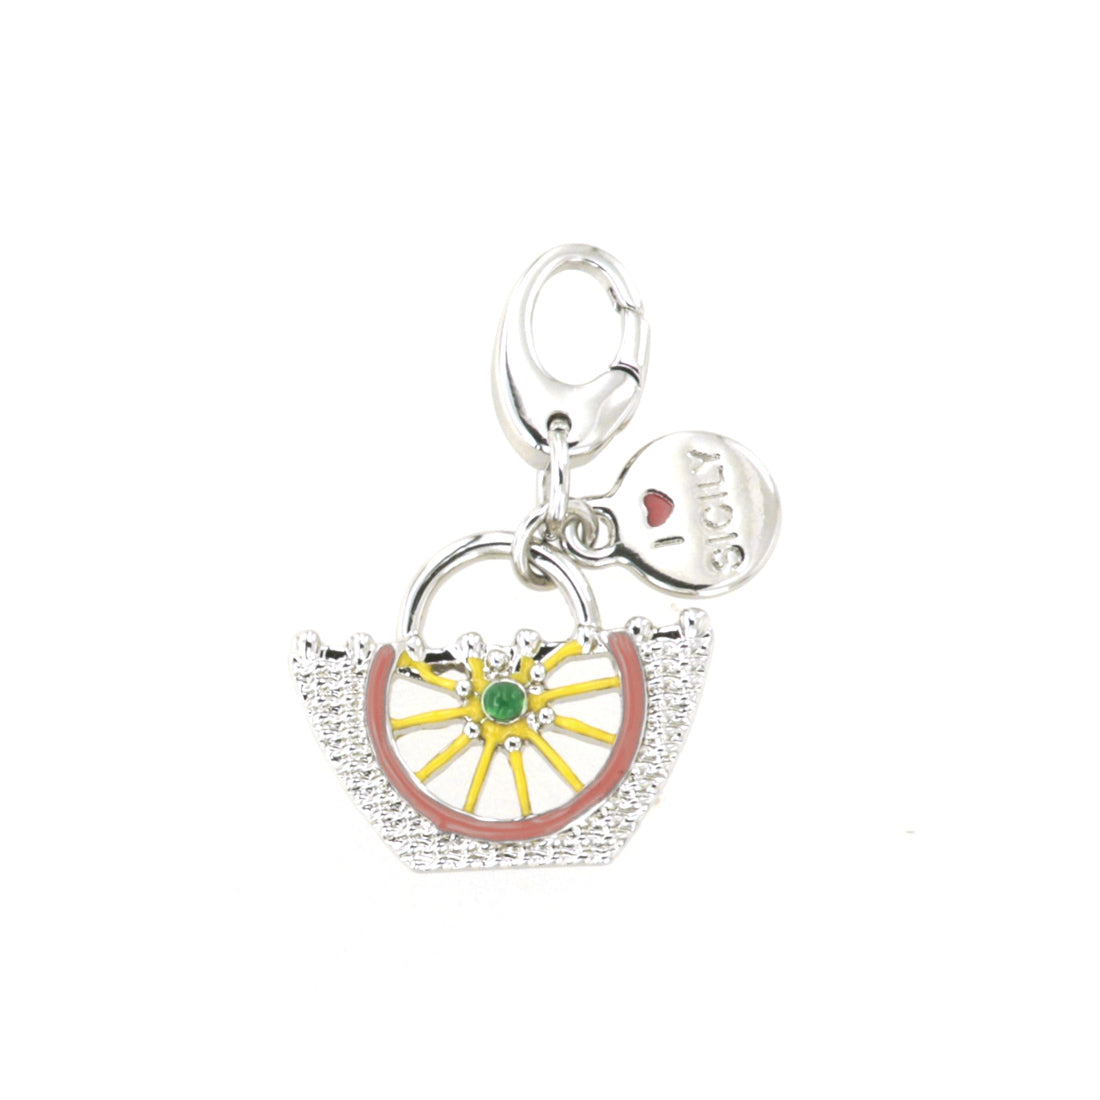 Metal pendant with Sicilian Coffa embellished with a drawing wheel wheel carriage in colored glazes